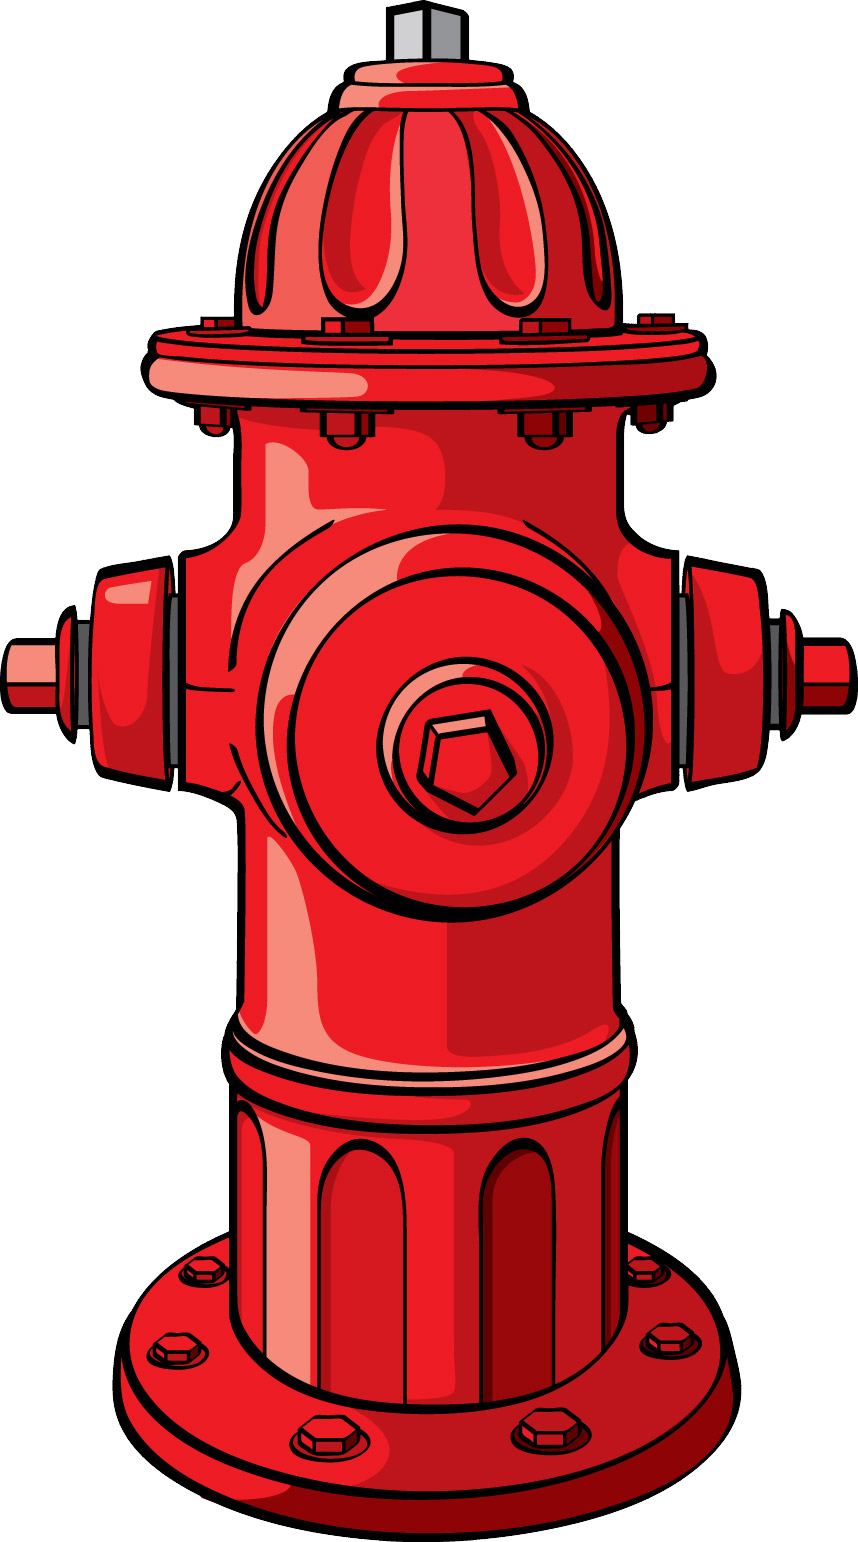 Fire hydrant-technic- PNG image with transparent background